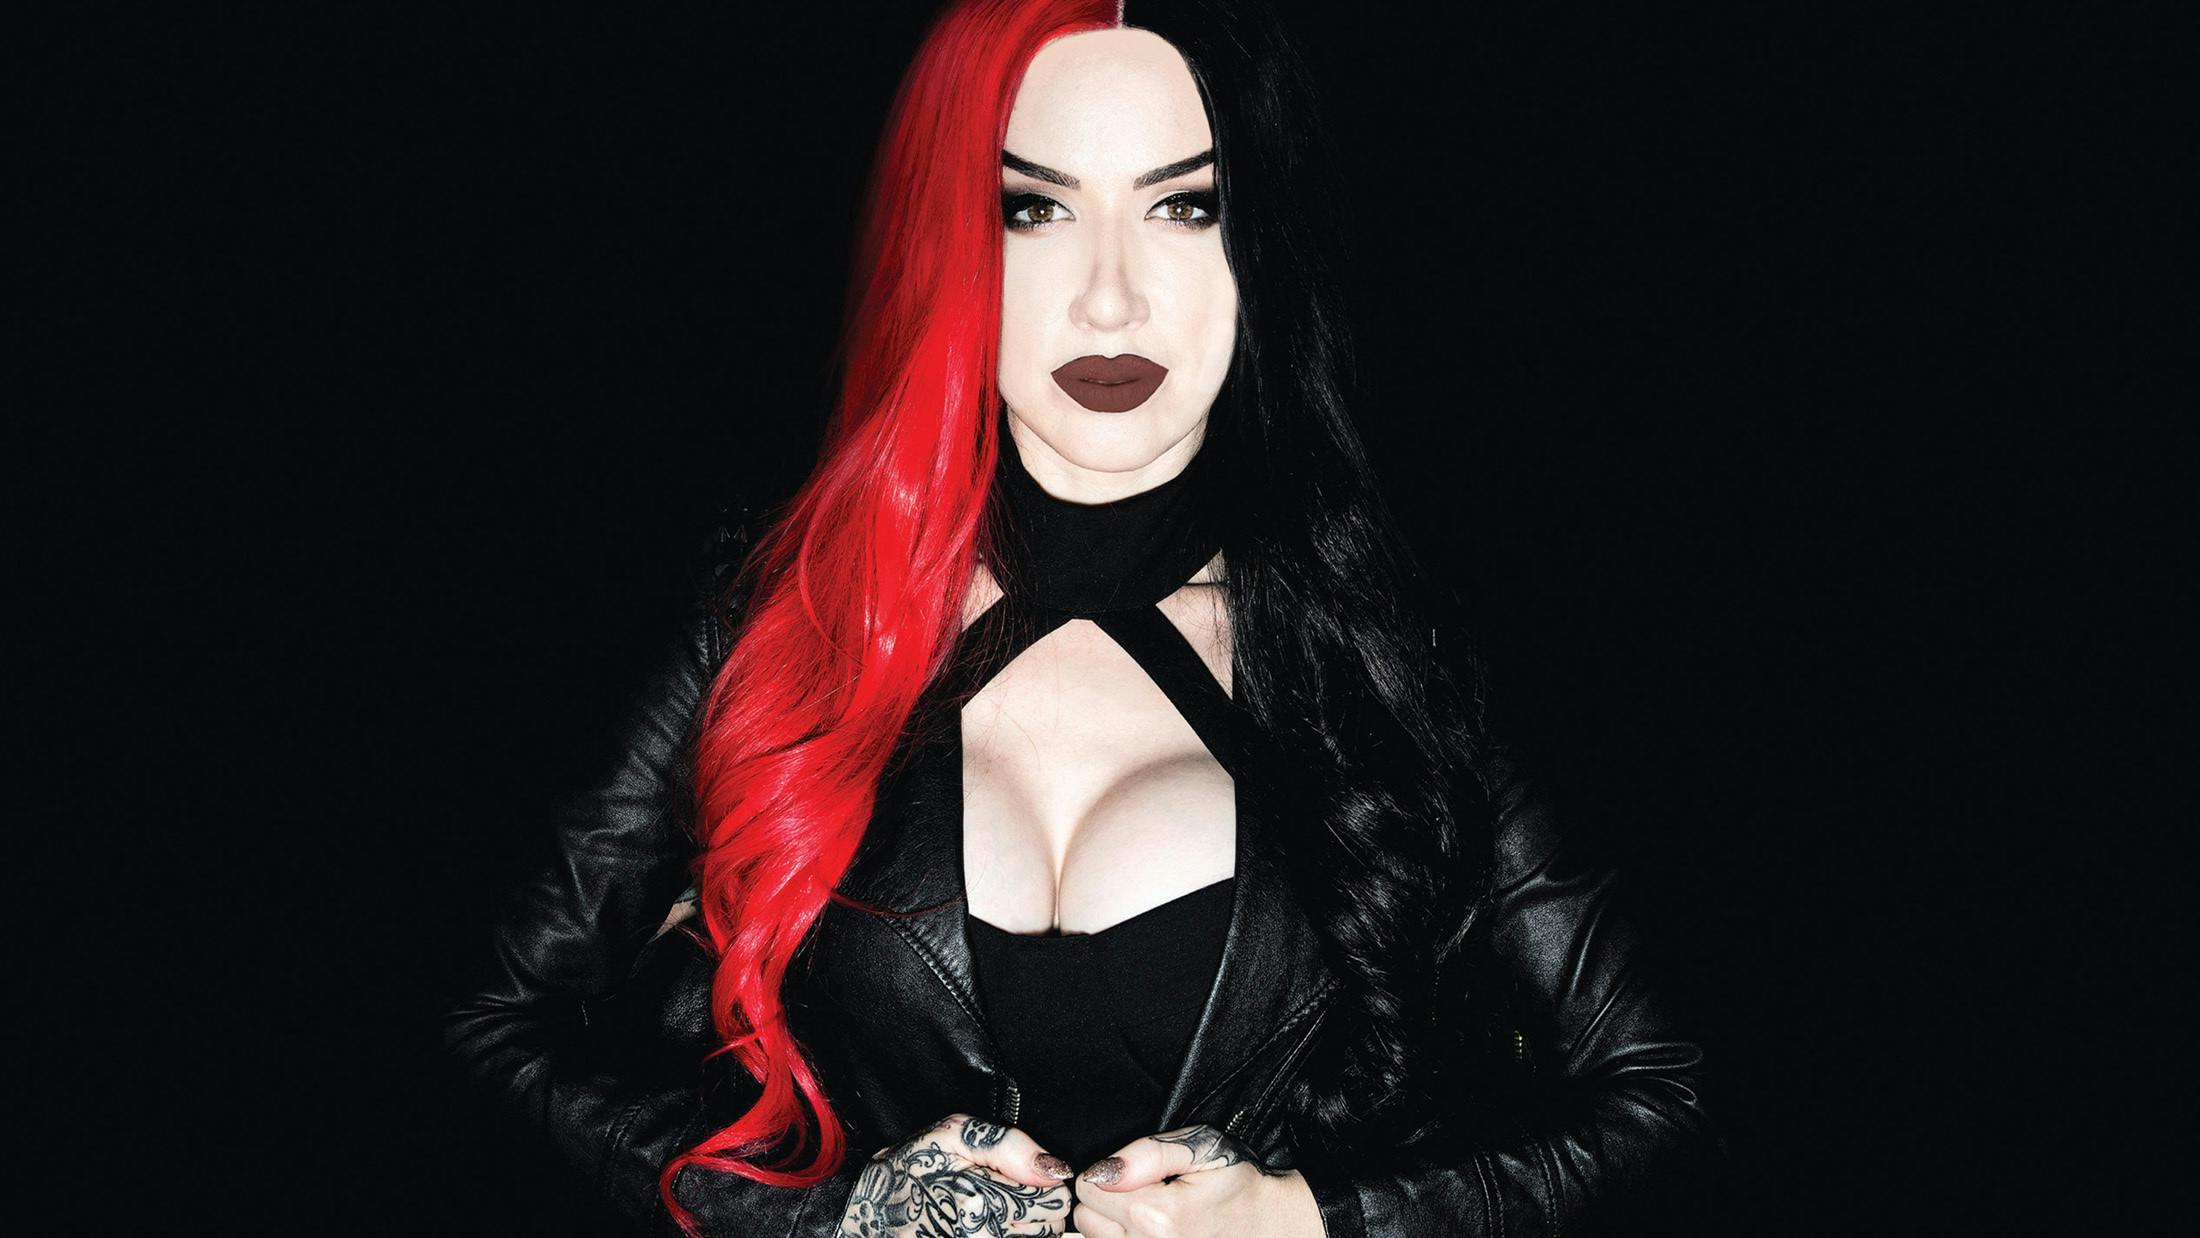 "I Do All Kinds Of Illegal Things, I Love Breaking The Law": 13 Questions With Ash Costello